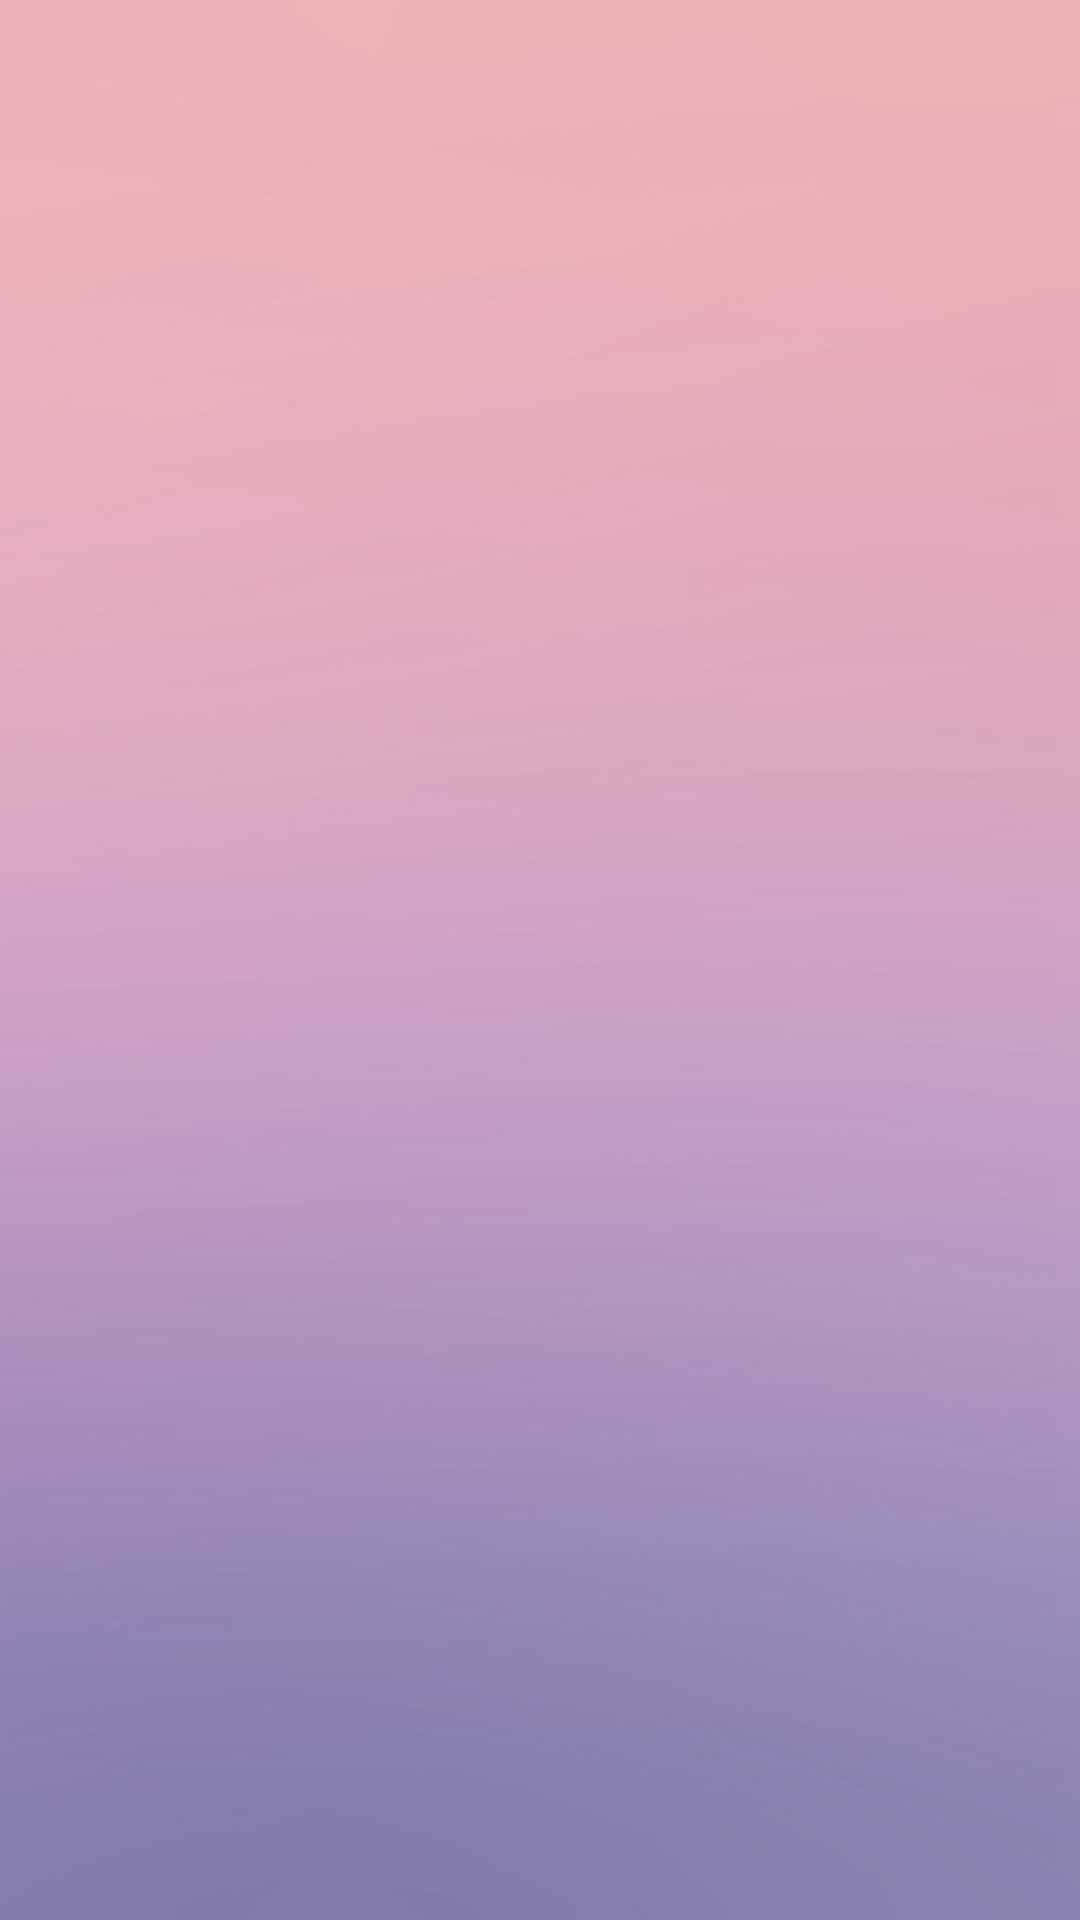 Download Pastel Ombre Background | Wallpapers.com